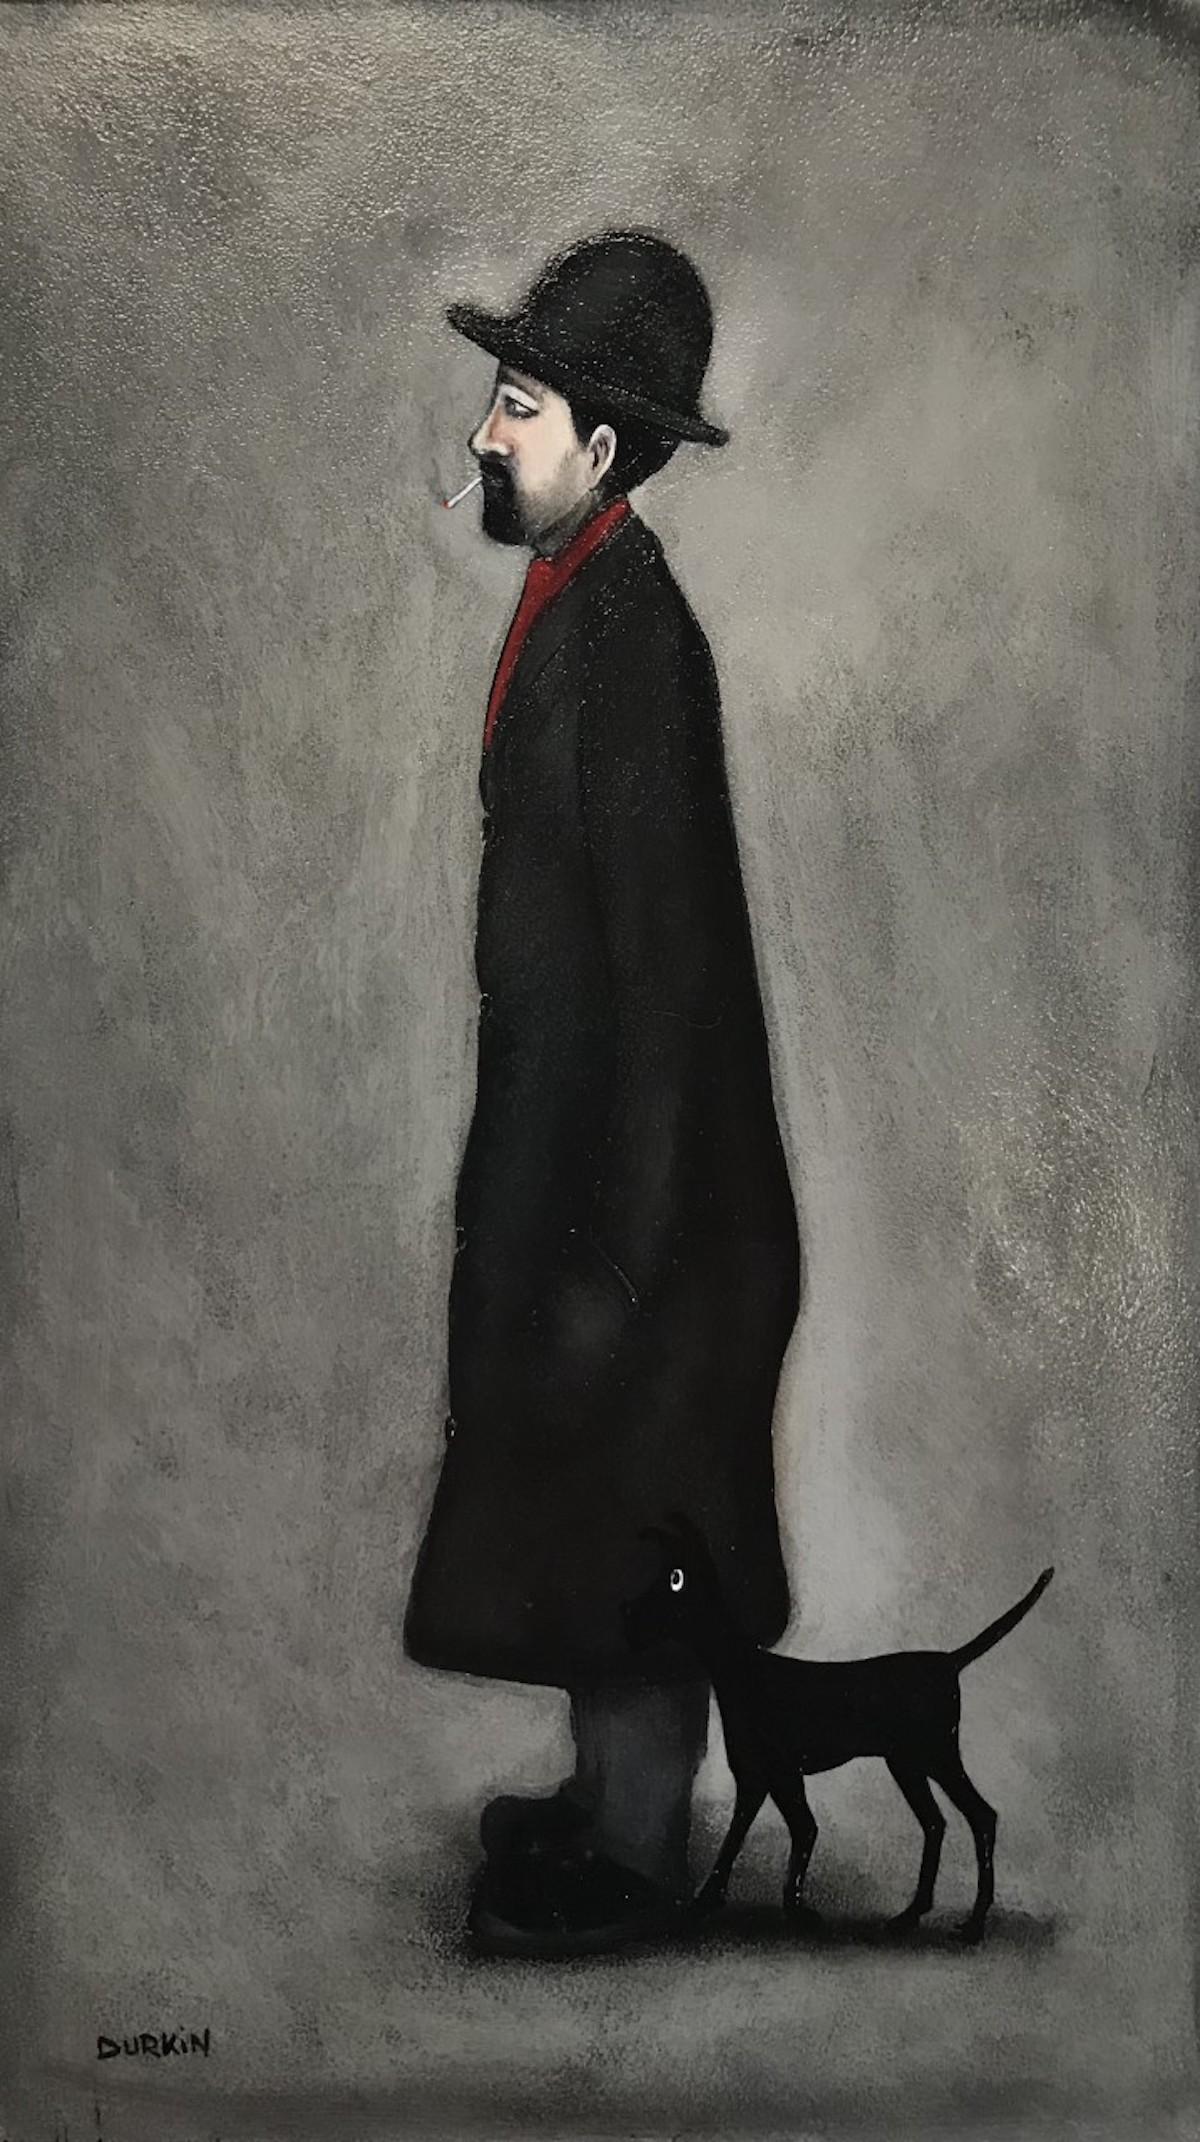 The man with the red scarf and dog by Sean Durkin, Lowry Inspired, Folk Art - Painting by Sean Durkin 